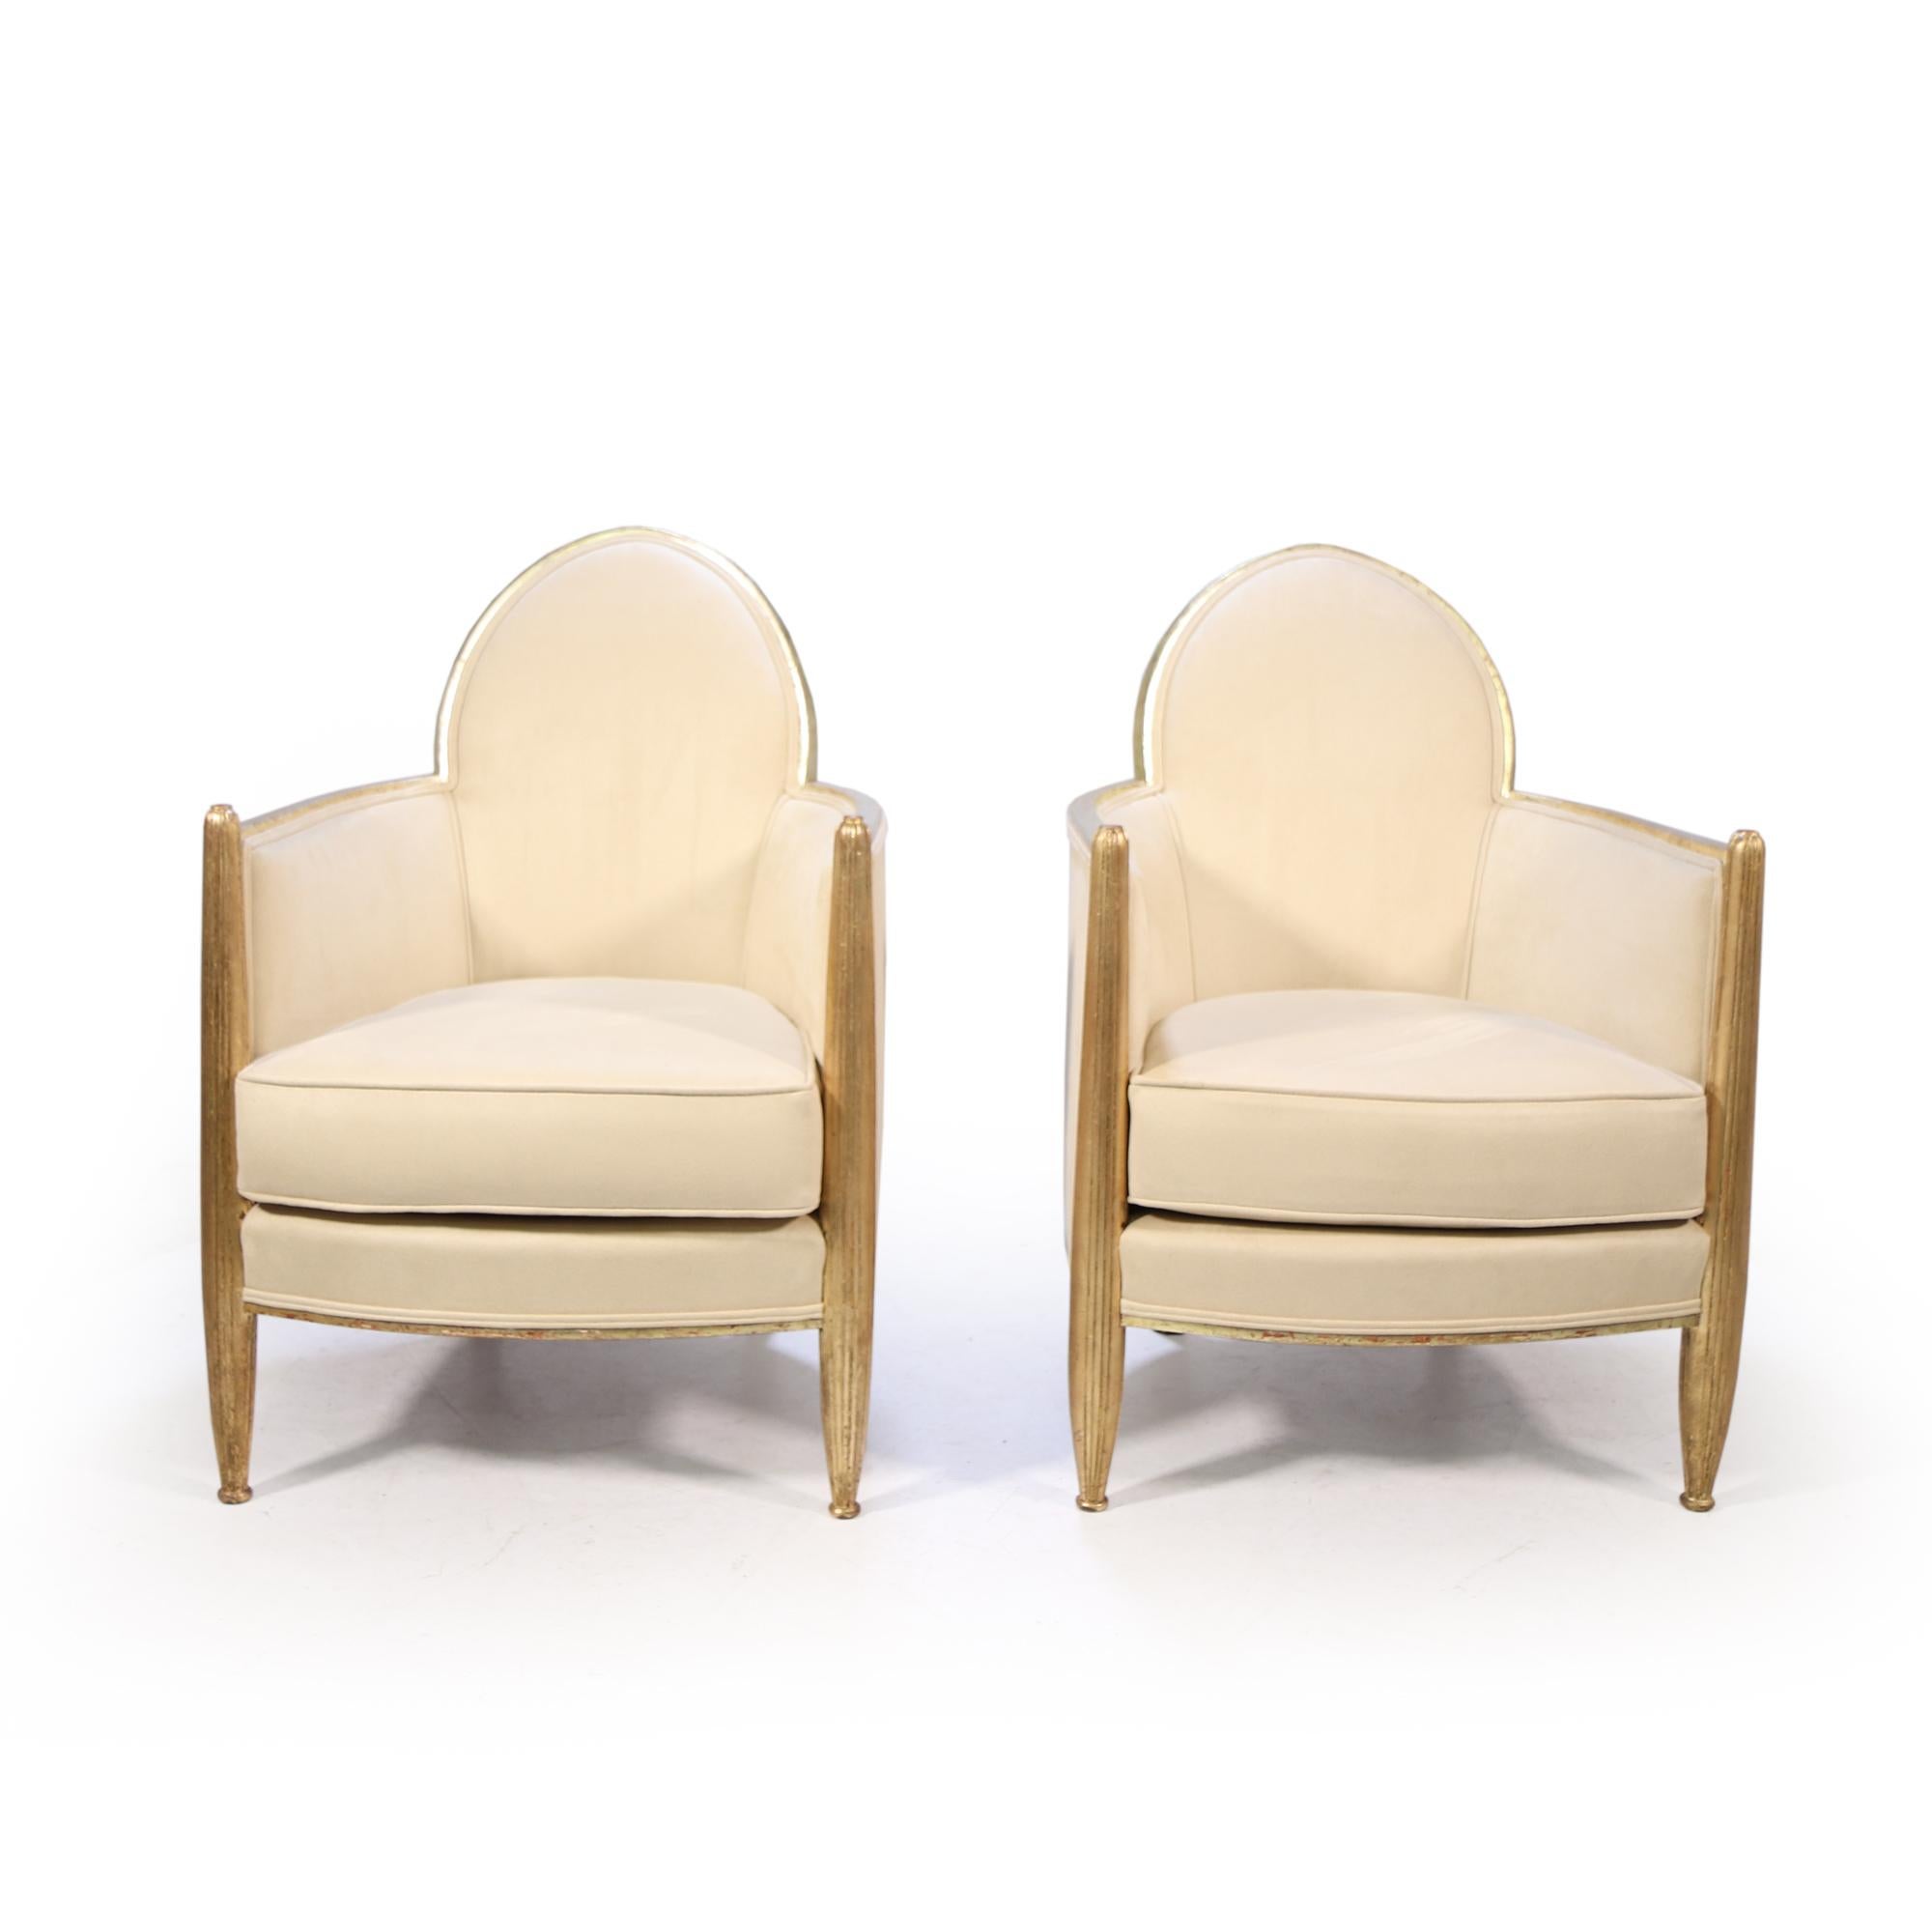 A fine quality parcel gilt shield back pair of armchairs, with two toned gilding the turned and fluted legs are gold leaf and the frame is white gold, this has 70% of original gilding and we have had it carefully matched in keeping the patina to the